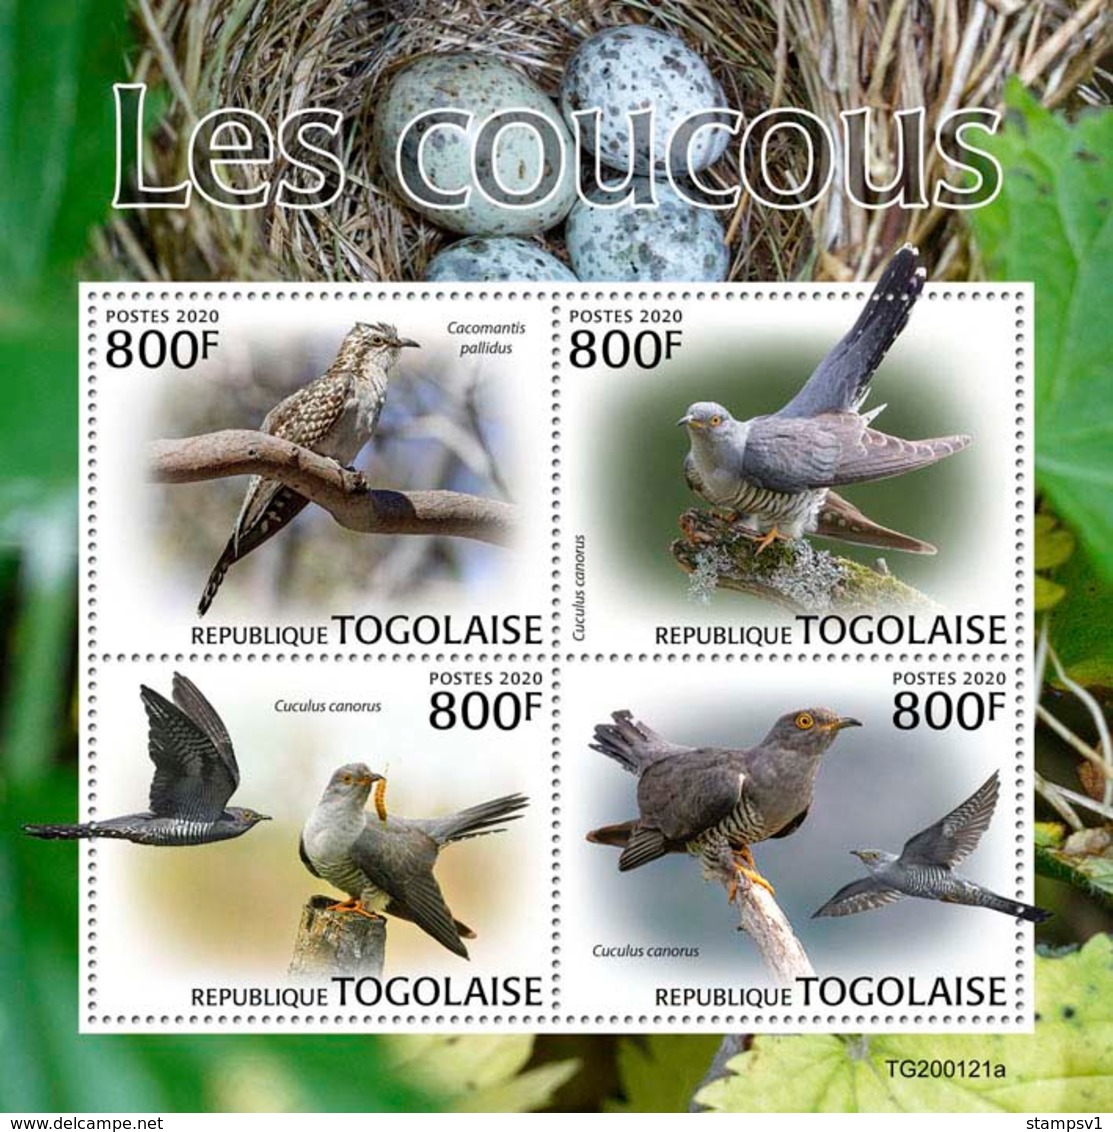 Togo. 2020 Cuckoos. (0121a)  OFFICIAL ISSUE - Coucous, Touracos